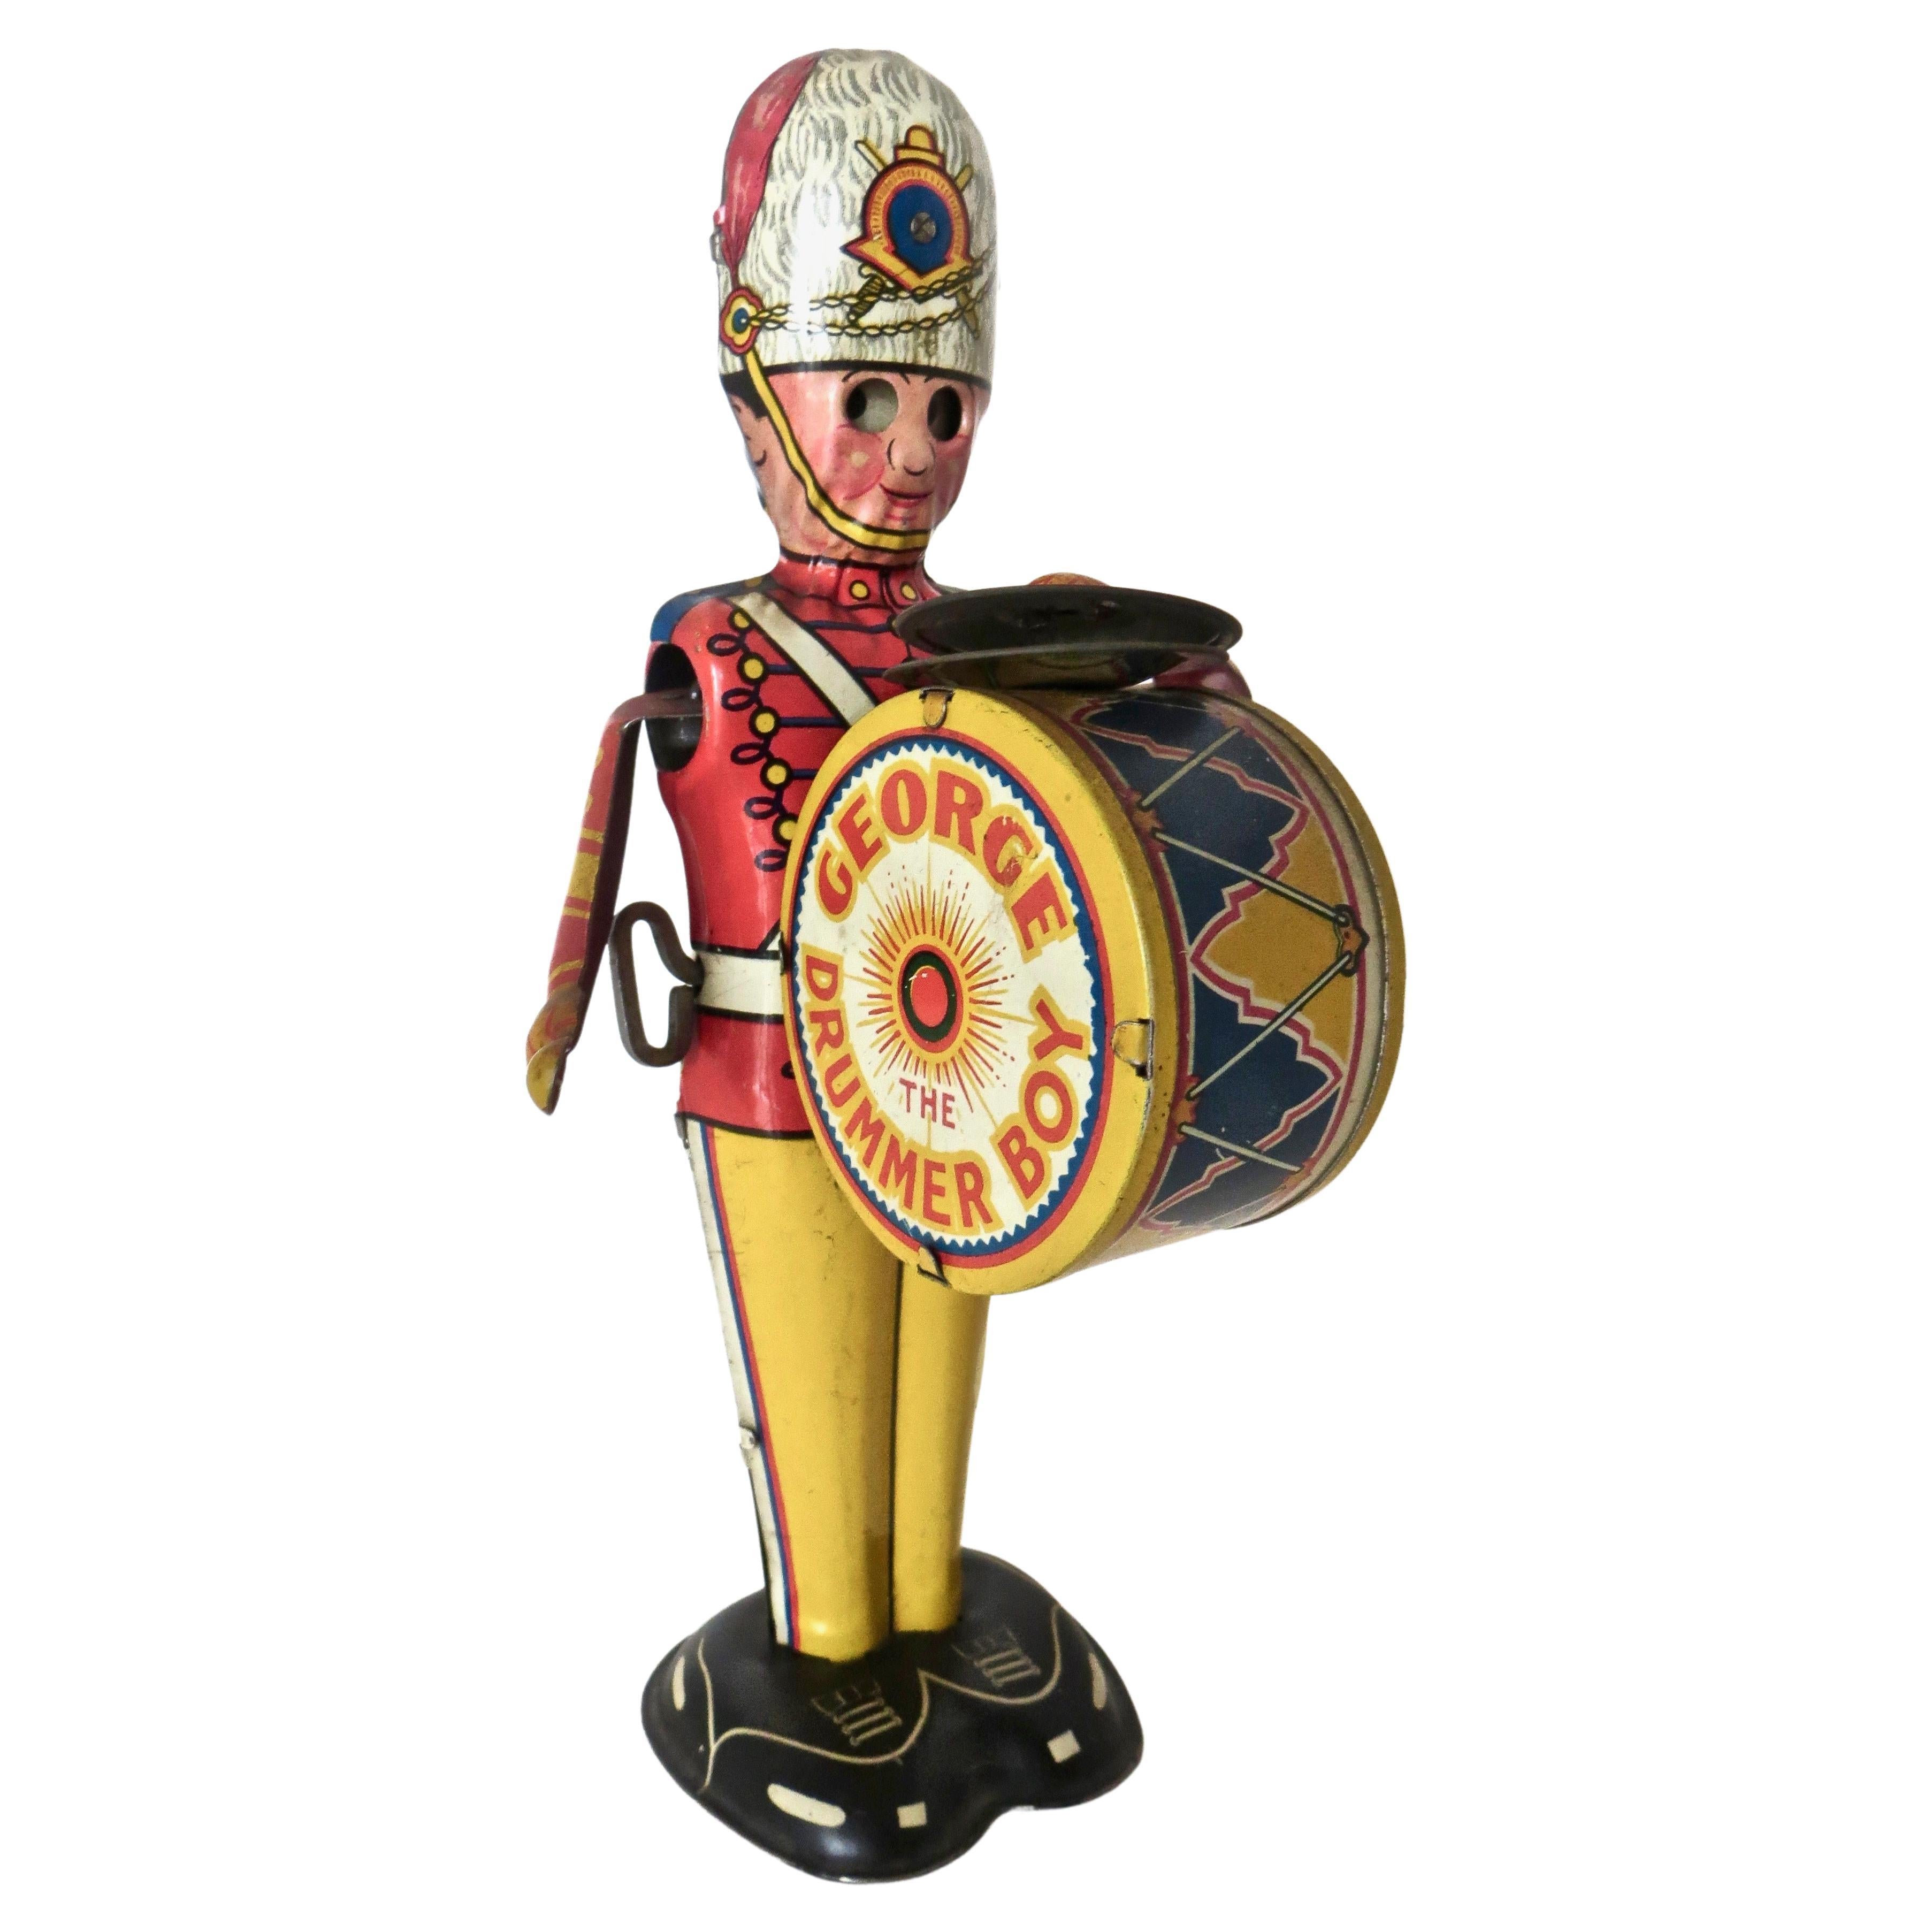 "George The Drummer Boy" Tin windup Toy by Louis Marx, New York City. Circa 1930